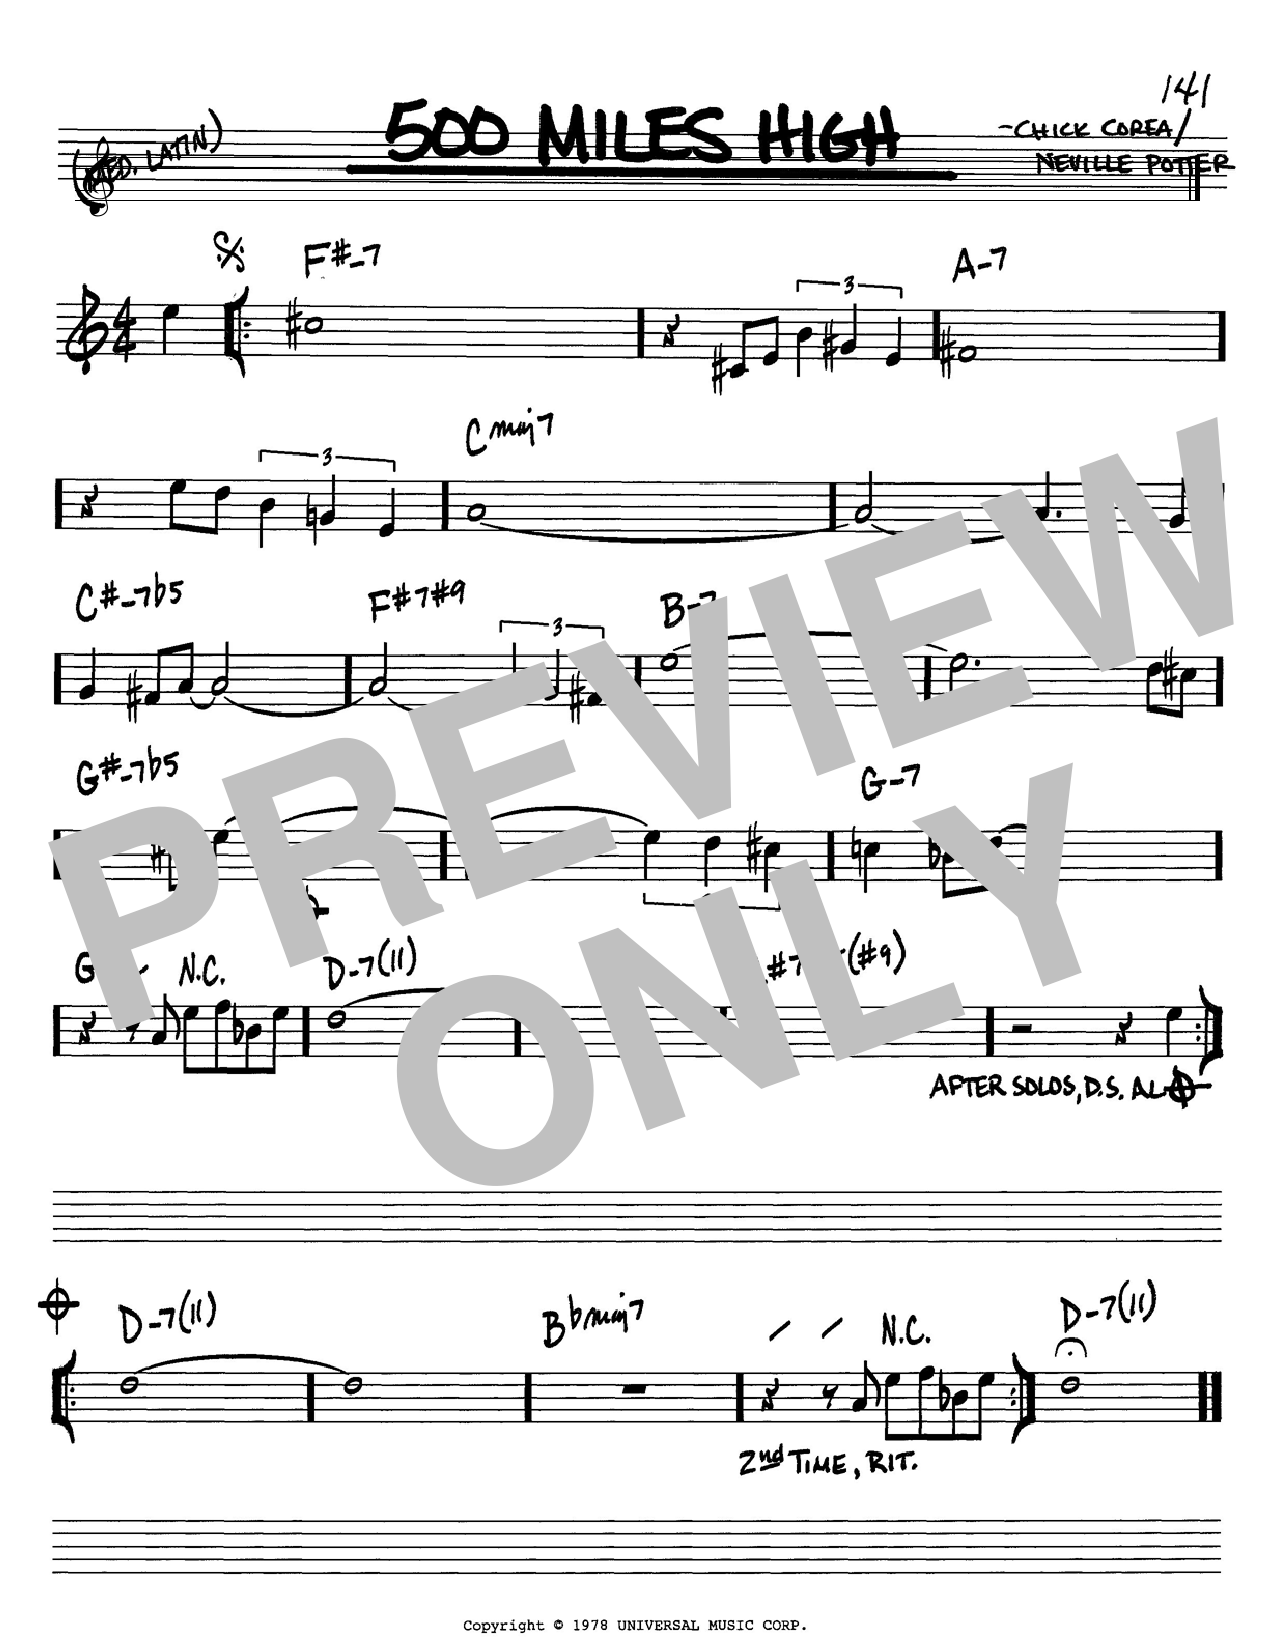 Chick Corea 500 Miles High Sheet Music Pdf Notes Chords Jazz Score Real Book Melody Chords Download Printable Sku 61476 Guitar lessons, tutorials & more. chick corea 500 miles high sheet music notes chords download printable real book melody chords pdf score sku 61476